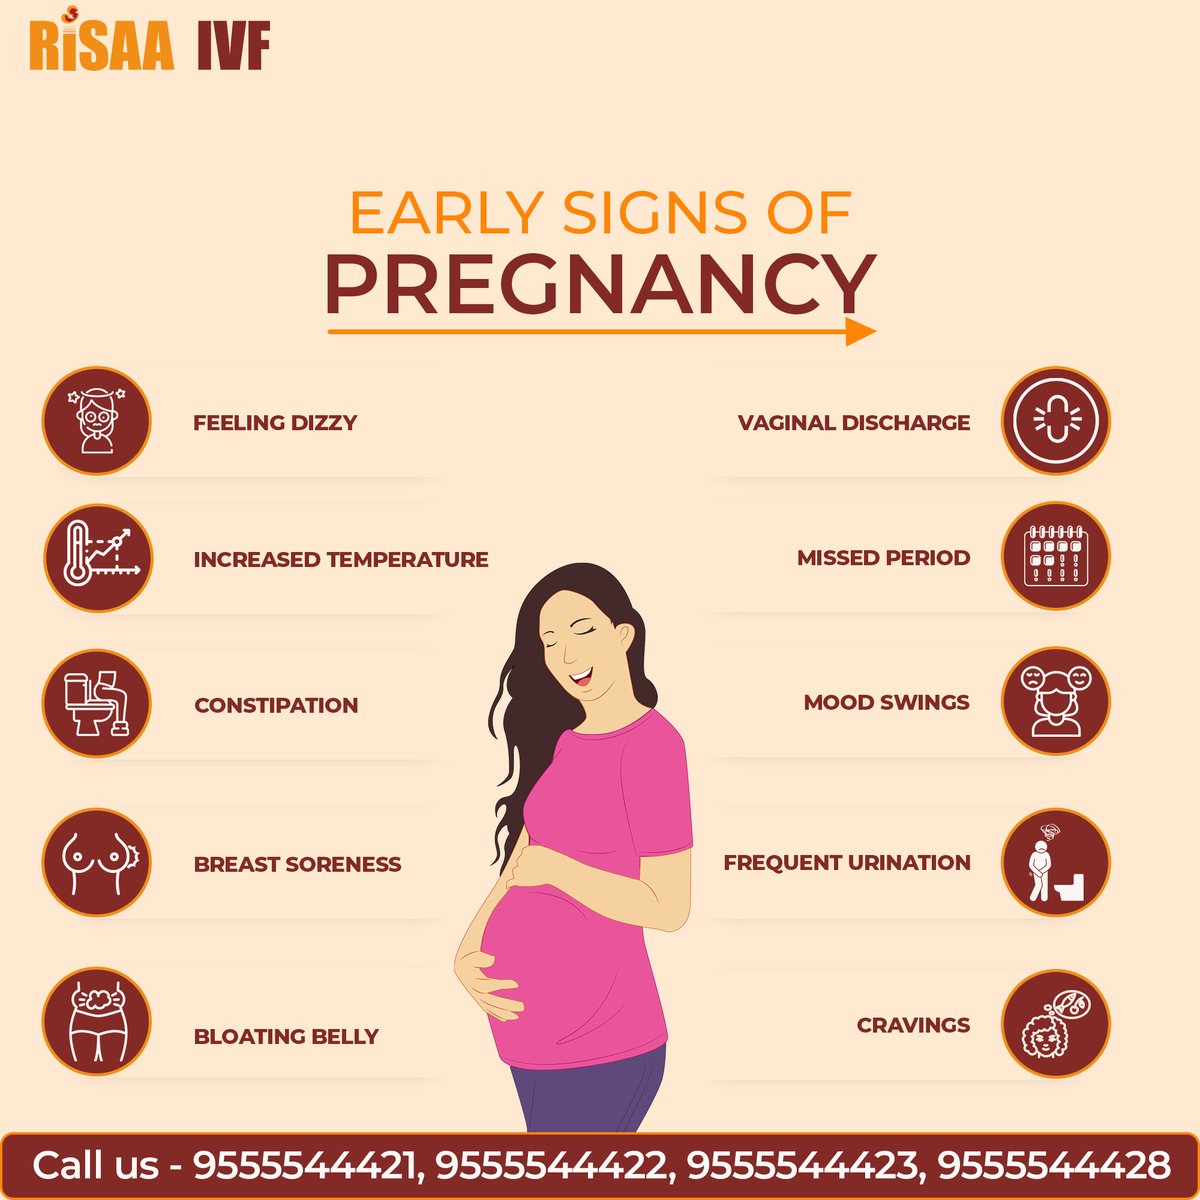 Not sure if you're pregnant? Keep it simple! Check out these early signs of pregnancy: tender breasts, fatigue, and more. Your body might be giving you the best news ever! Stay tuned for more tips! #RISAAIVF #PregnancySigns #ExpectingSoon'